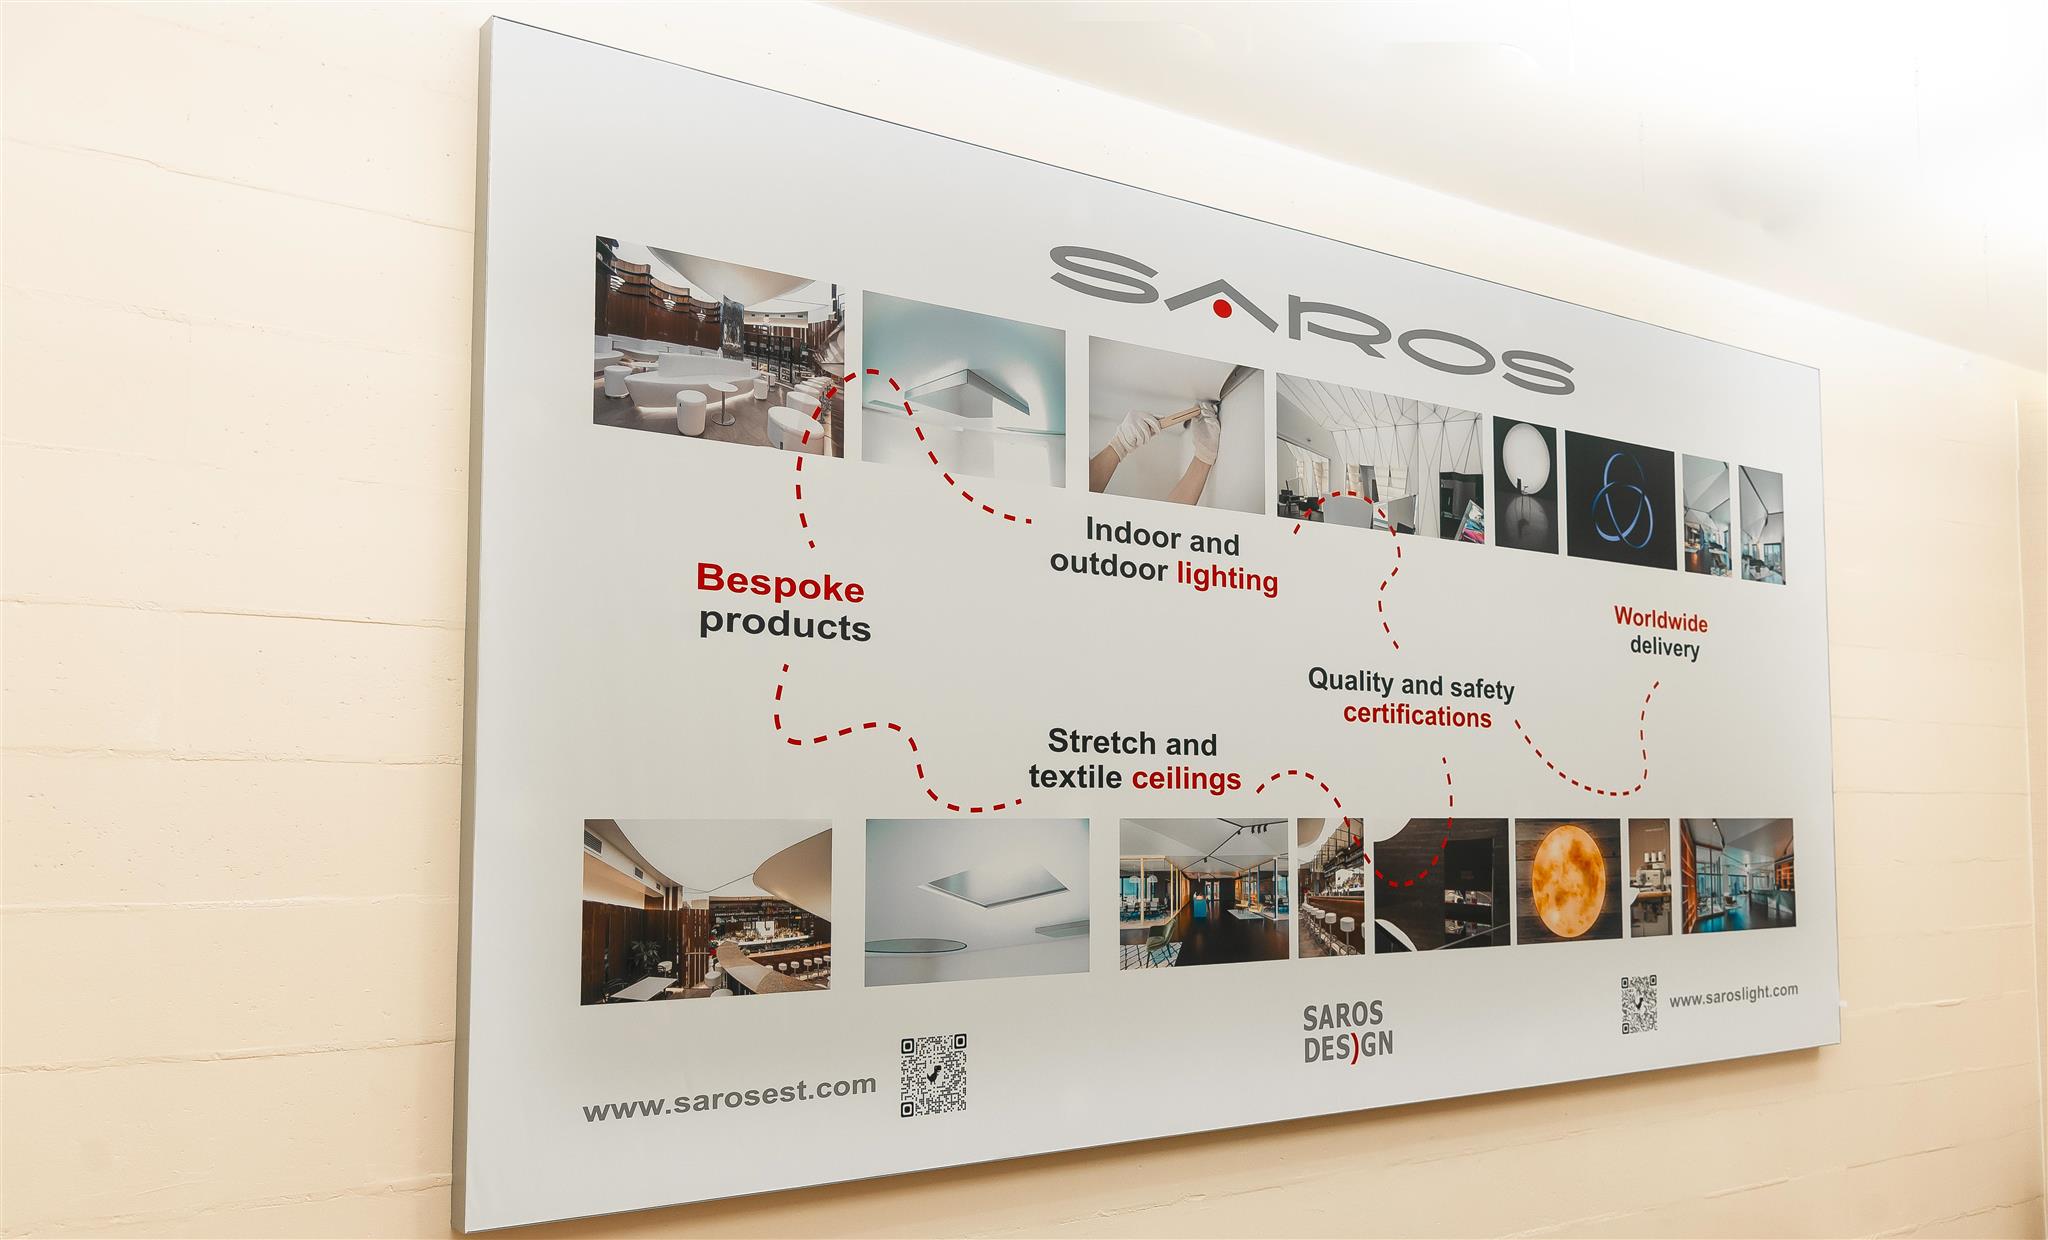 Descor® textile ceilings and wall panels